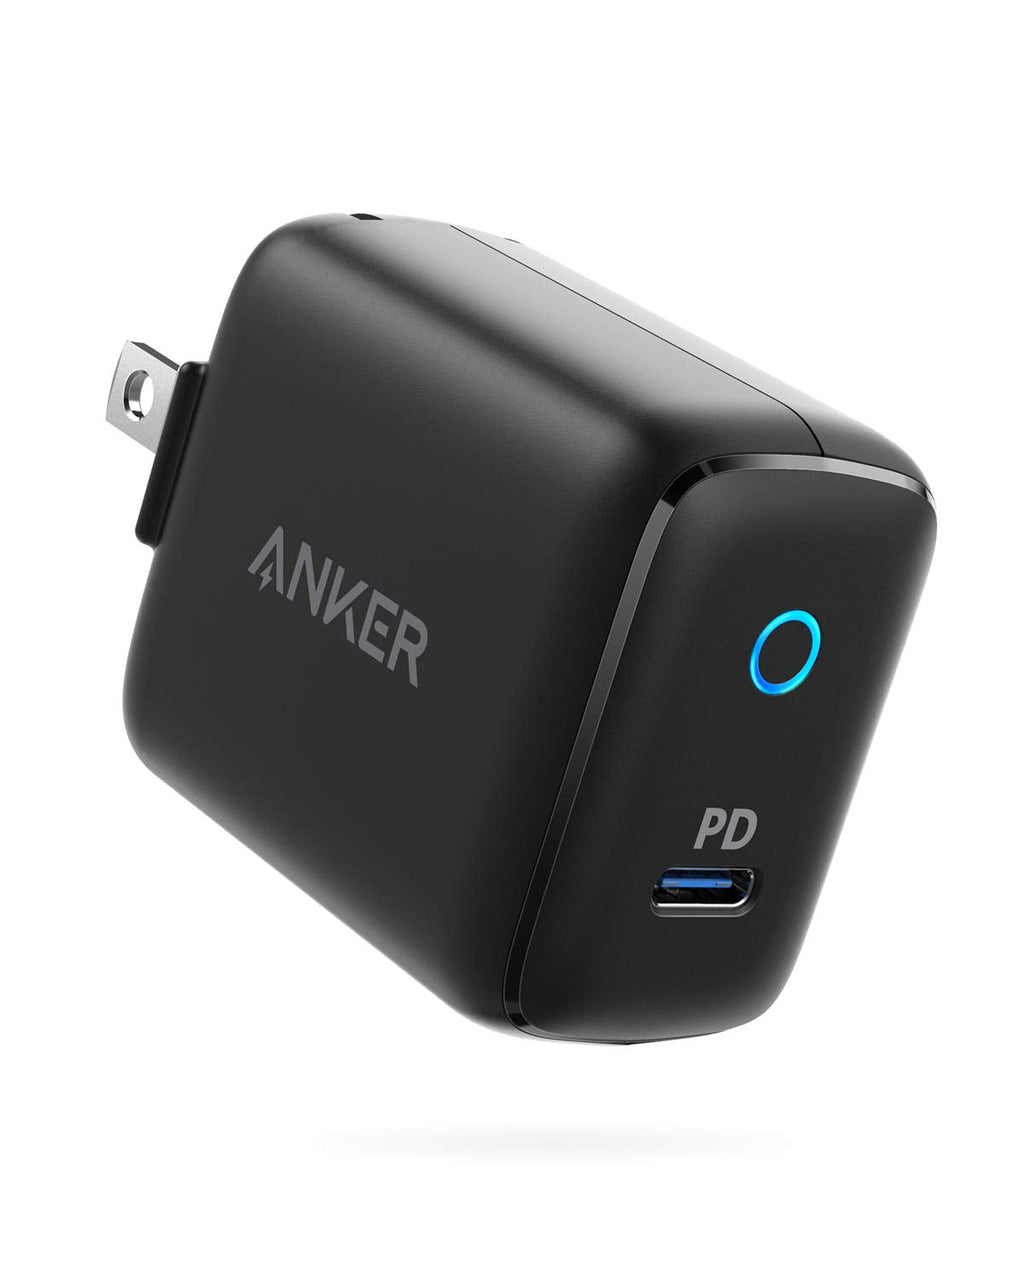 [Australia - AusPower] - USB C 18W Power Delivery Charger, Anker PowerPort PD 1 USB-C Wall Charger, Foldable Plug for iPhone Xs/Max/XR, iPad Pro, Pixel 3/2, Galaxy S9/S8/Plus, Nintendo and More Black 